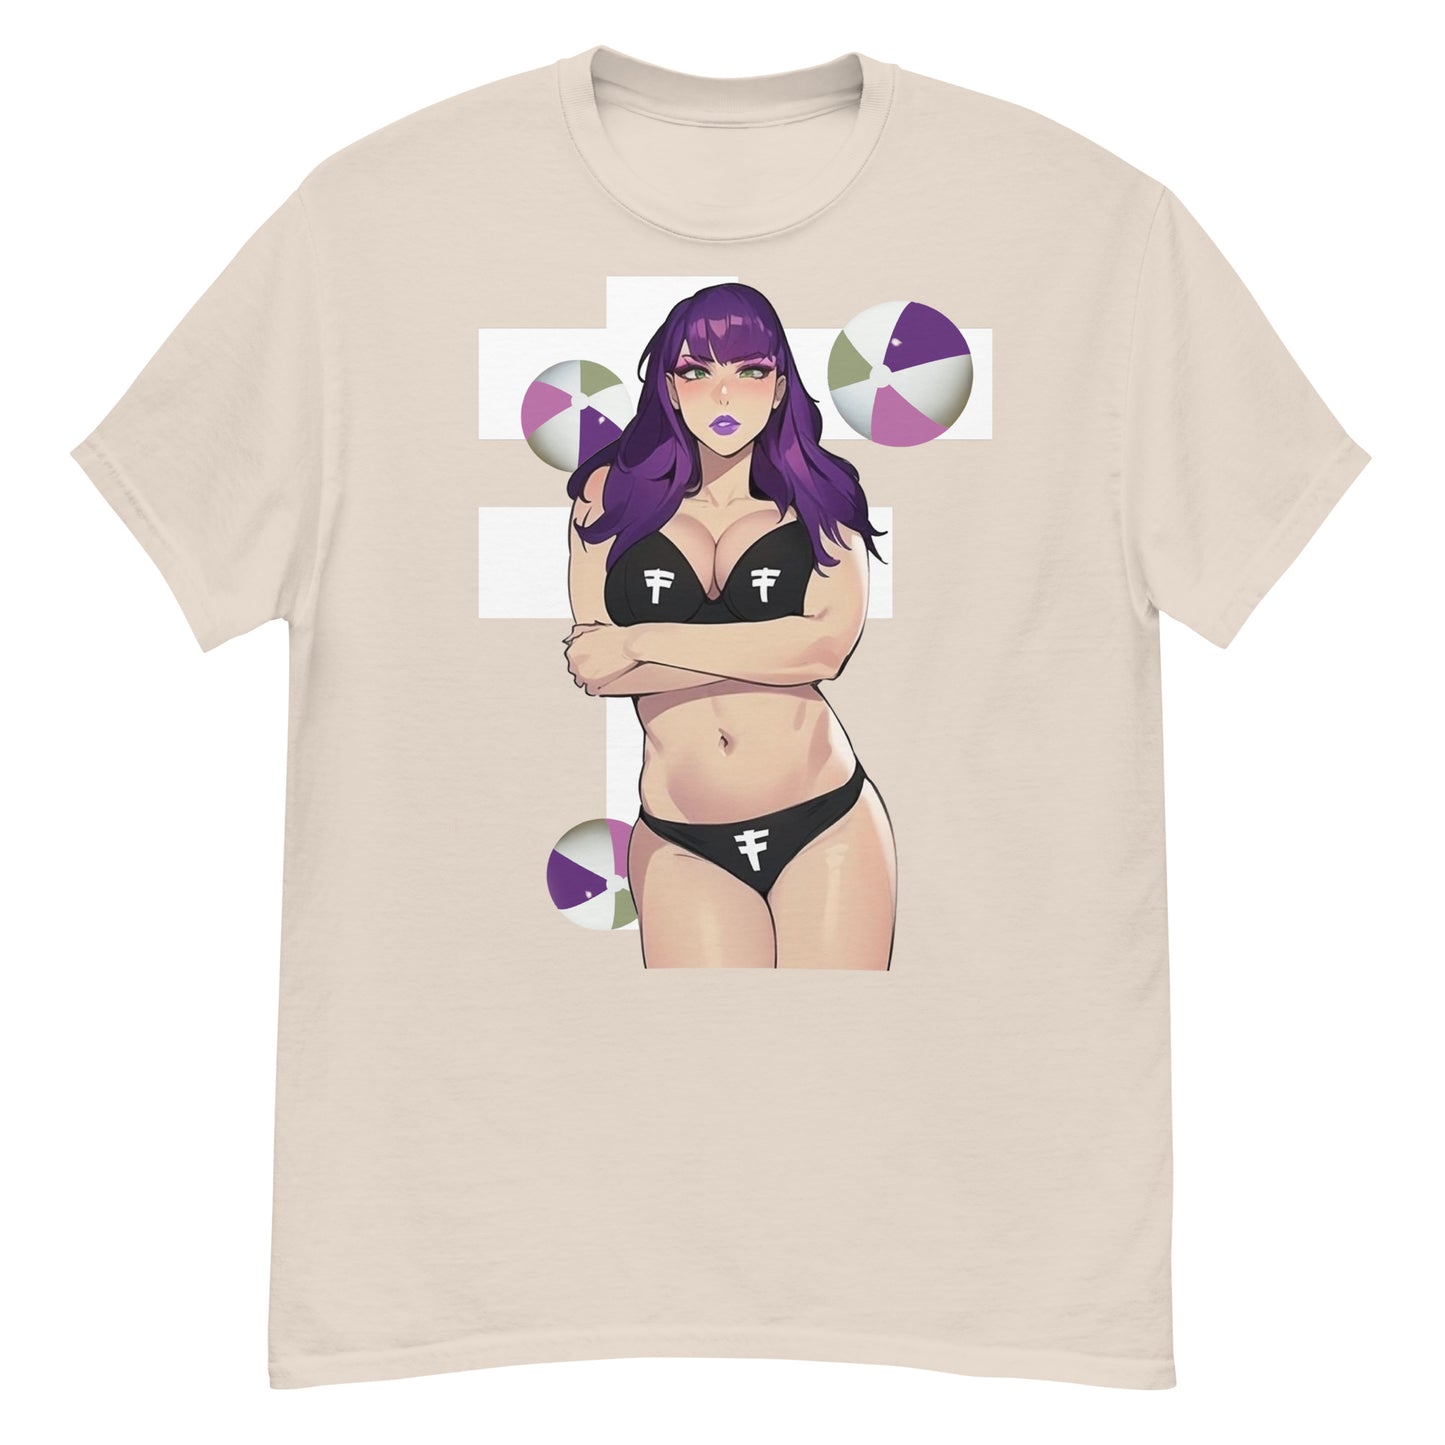 GOTH GIRL GOES TO THE BEACH (GRAPHIC TEE)